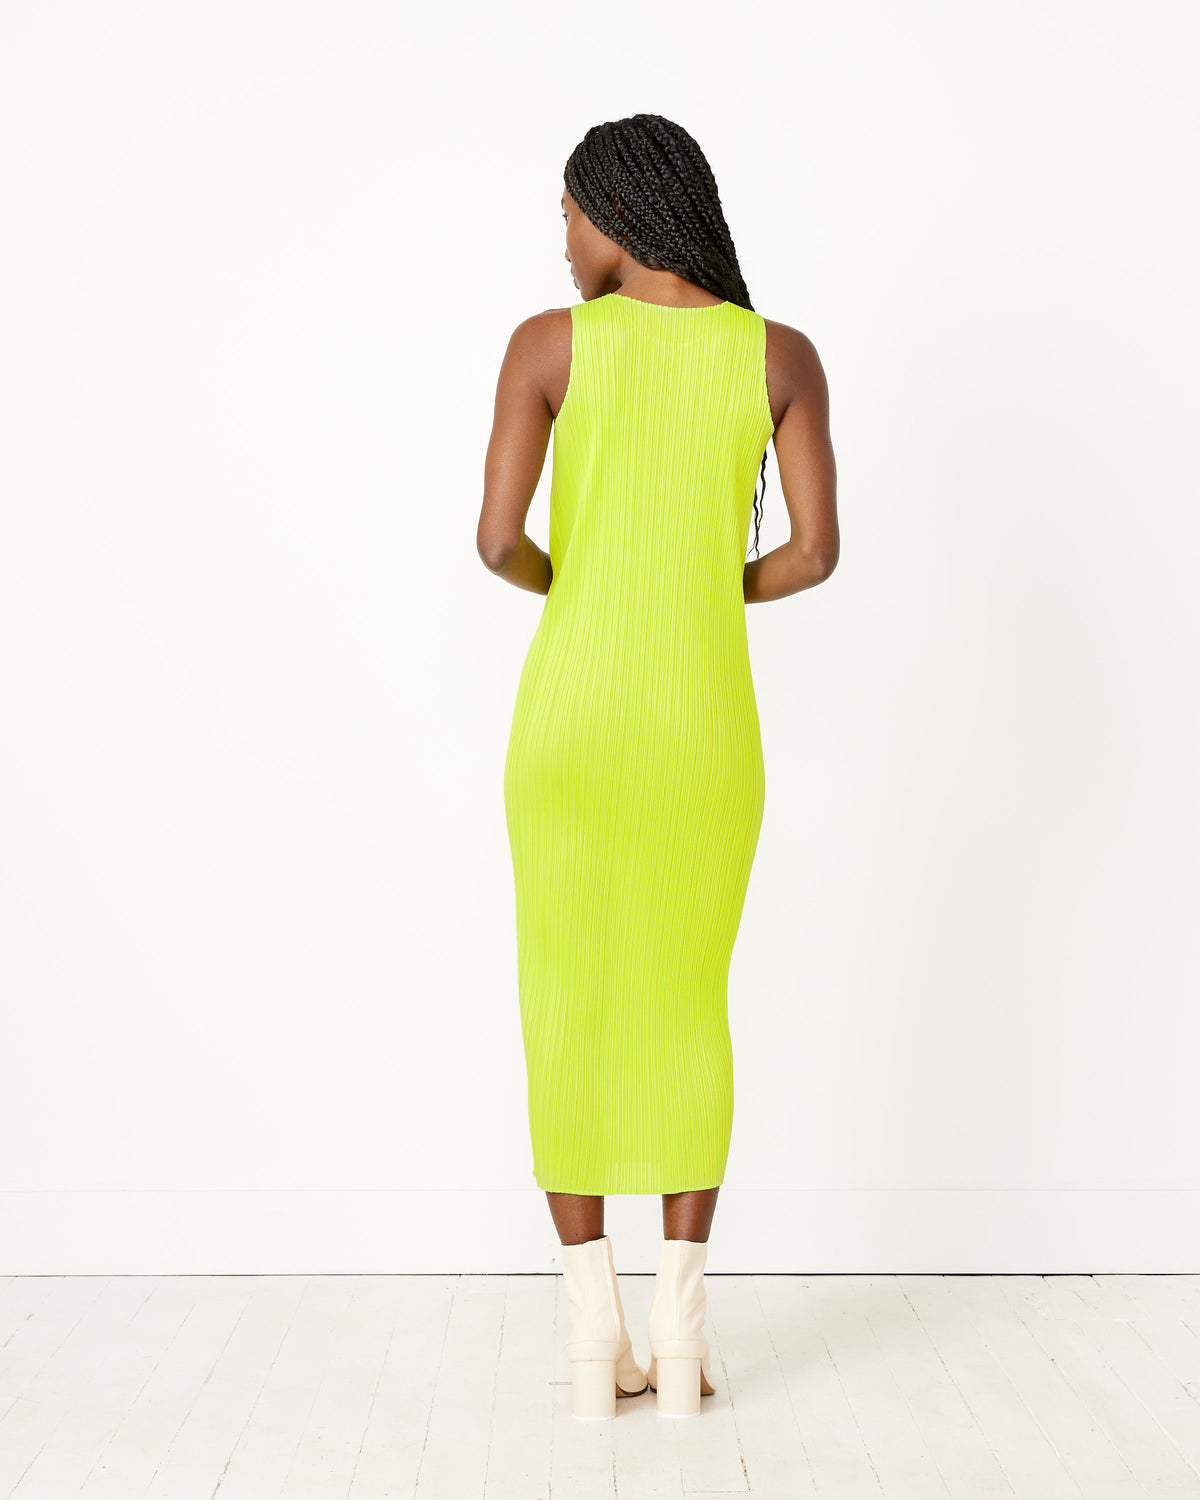 Be inspired and look through our Colorful Basics 3 Dress in Yellow